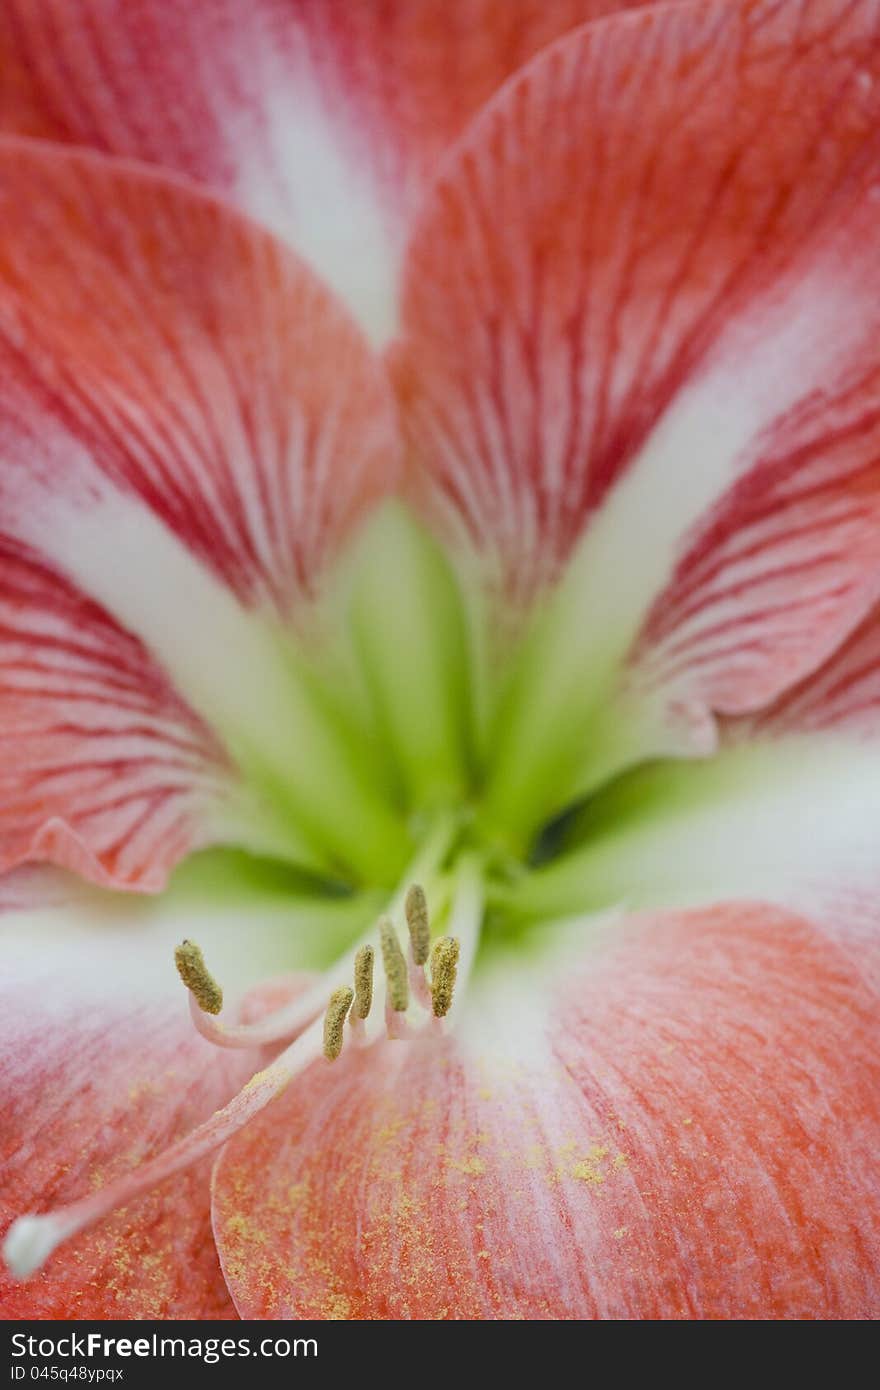 Pink, slightly orange flower with stamens and grains of pollen.